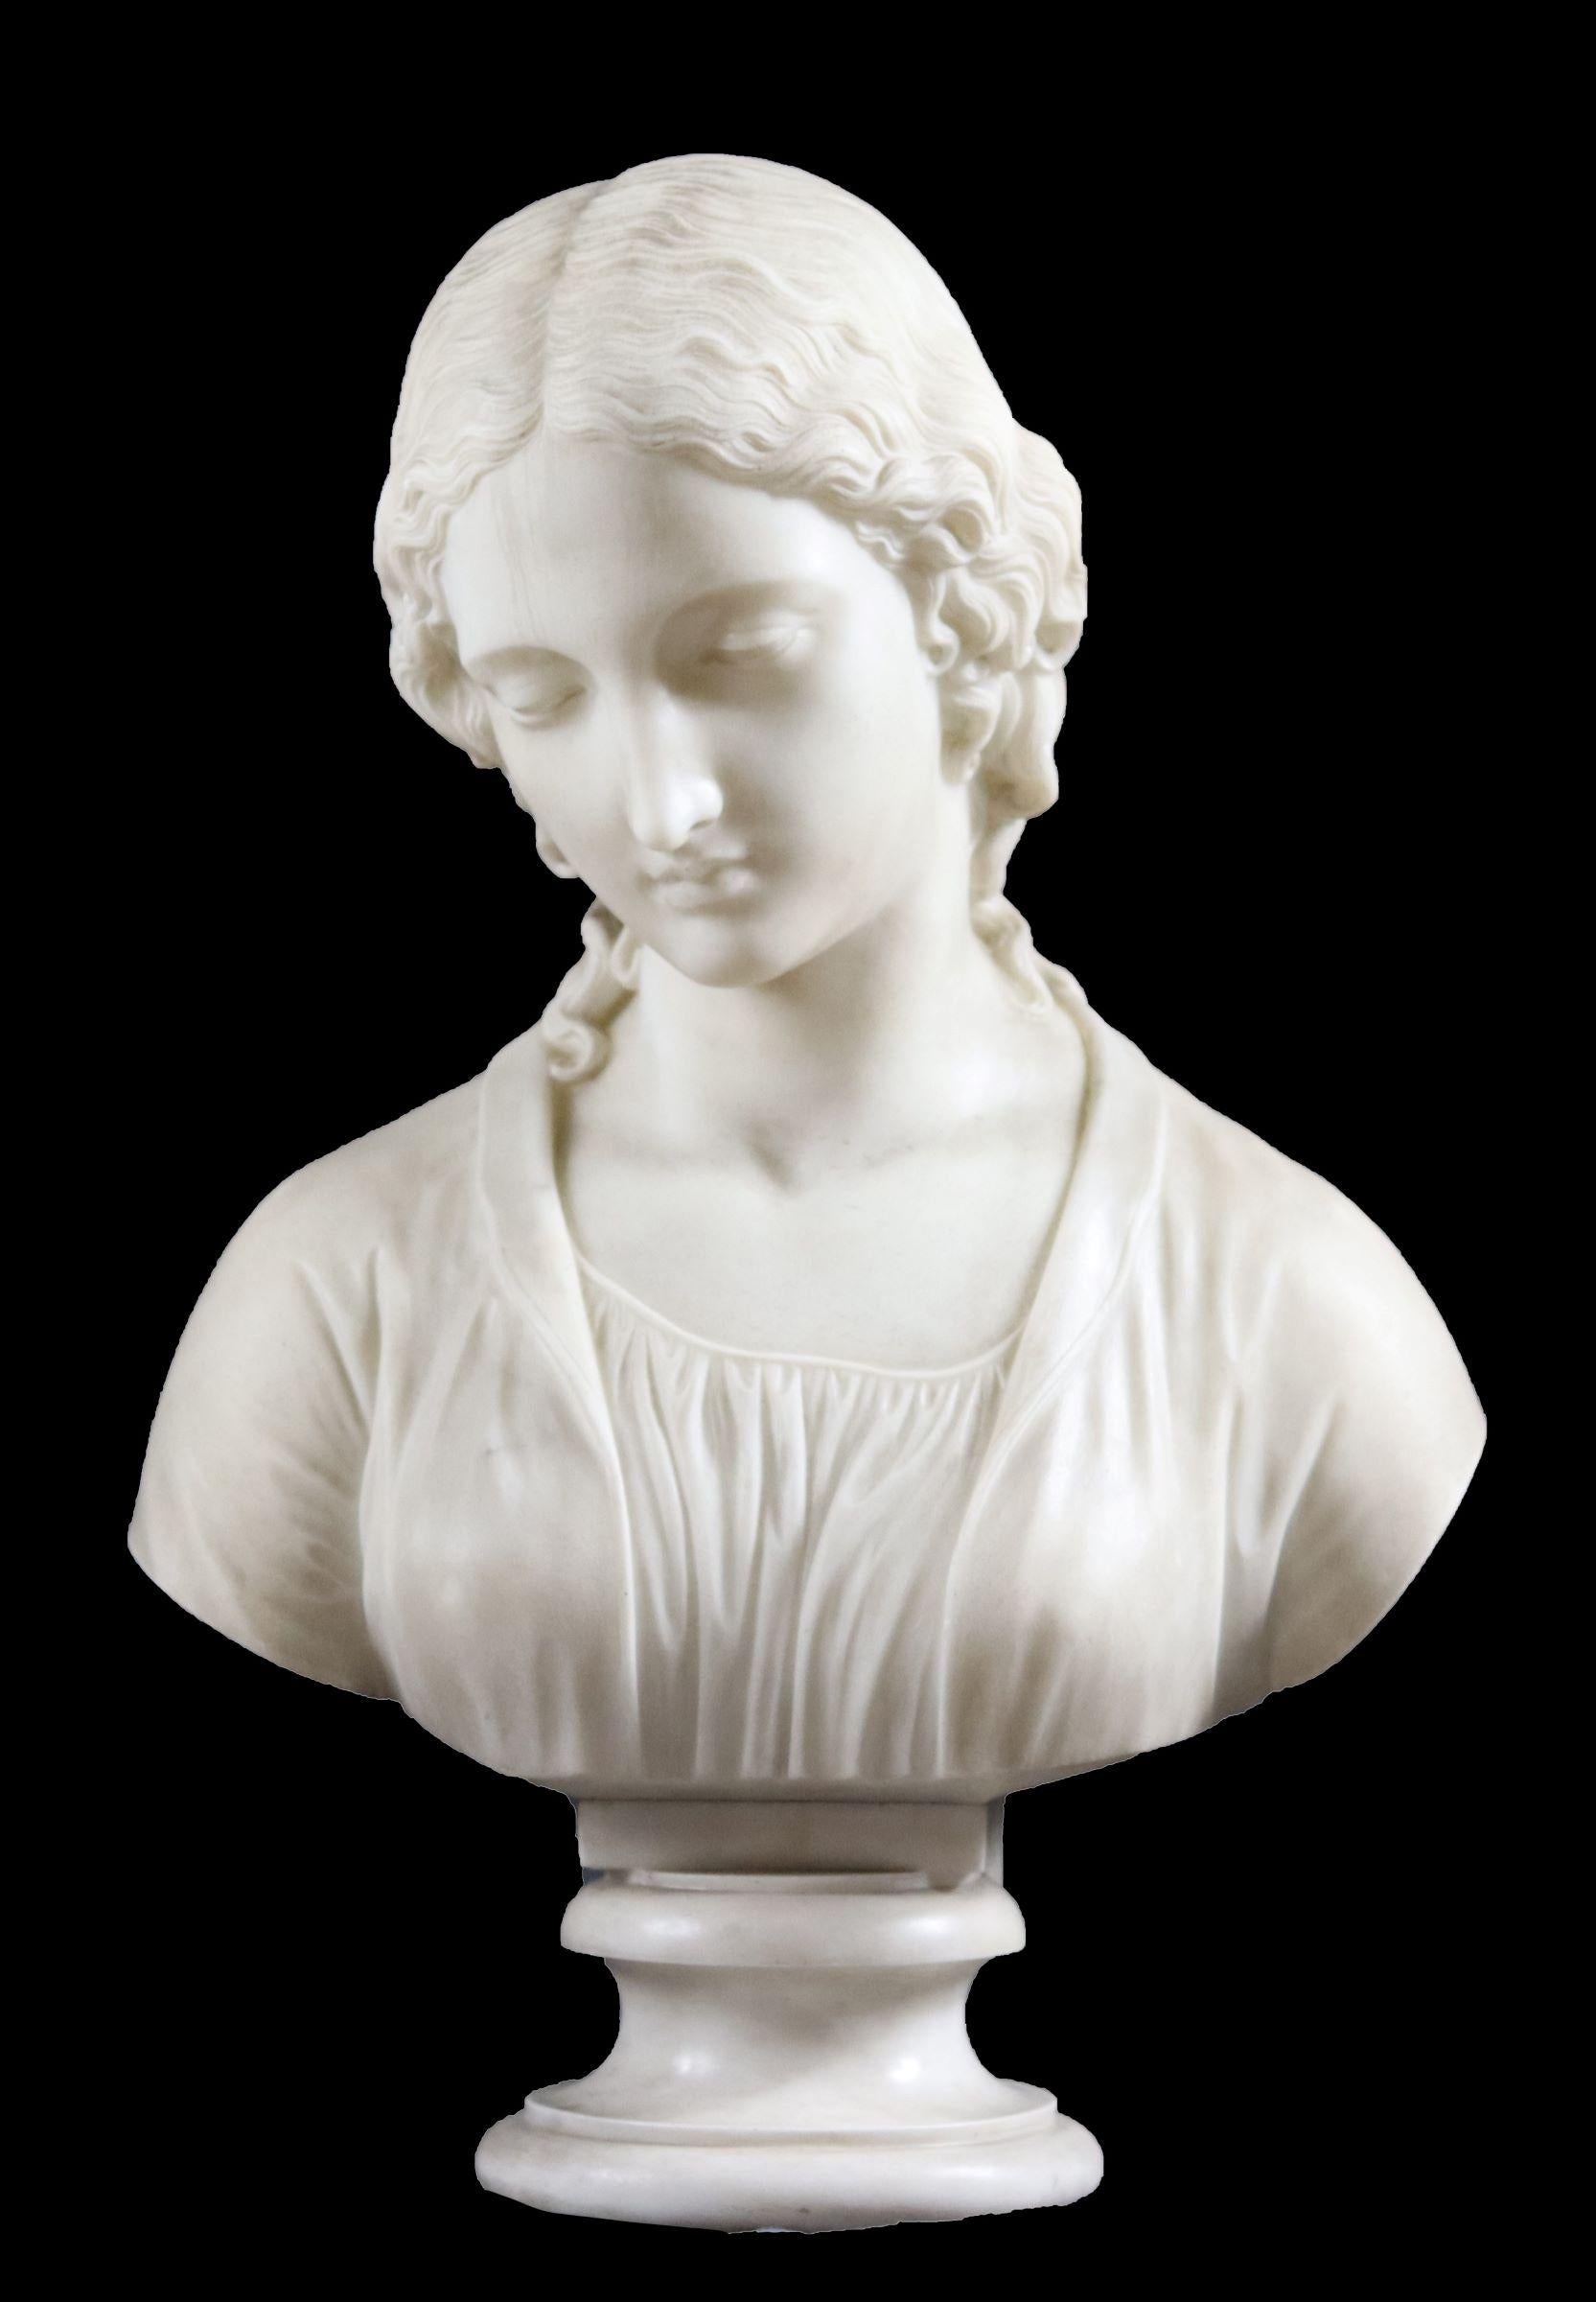 Marble Bust of a Beautiful Maiden - Sculpture by Holme Cardwell